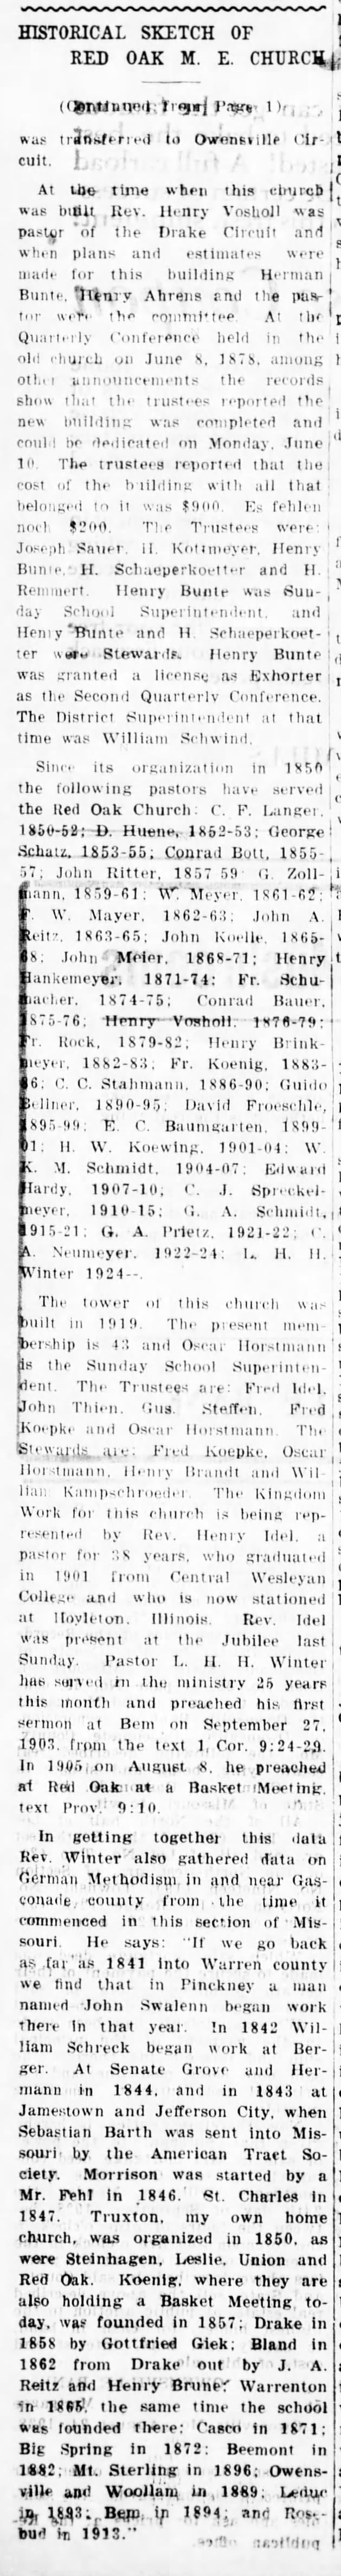 14 sept 1928 history red oak church page 2